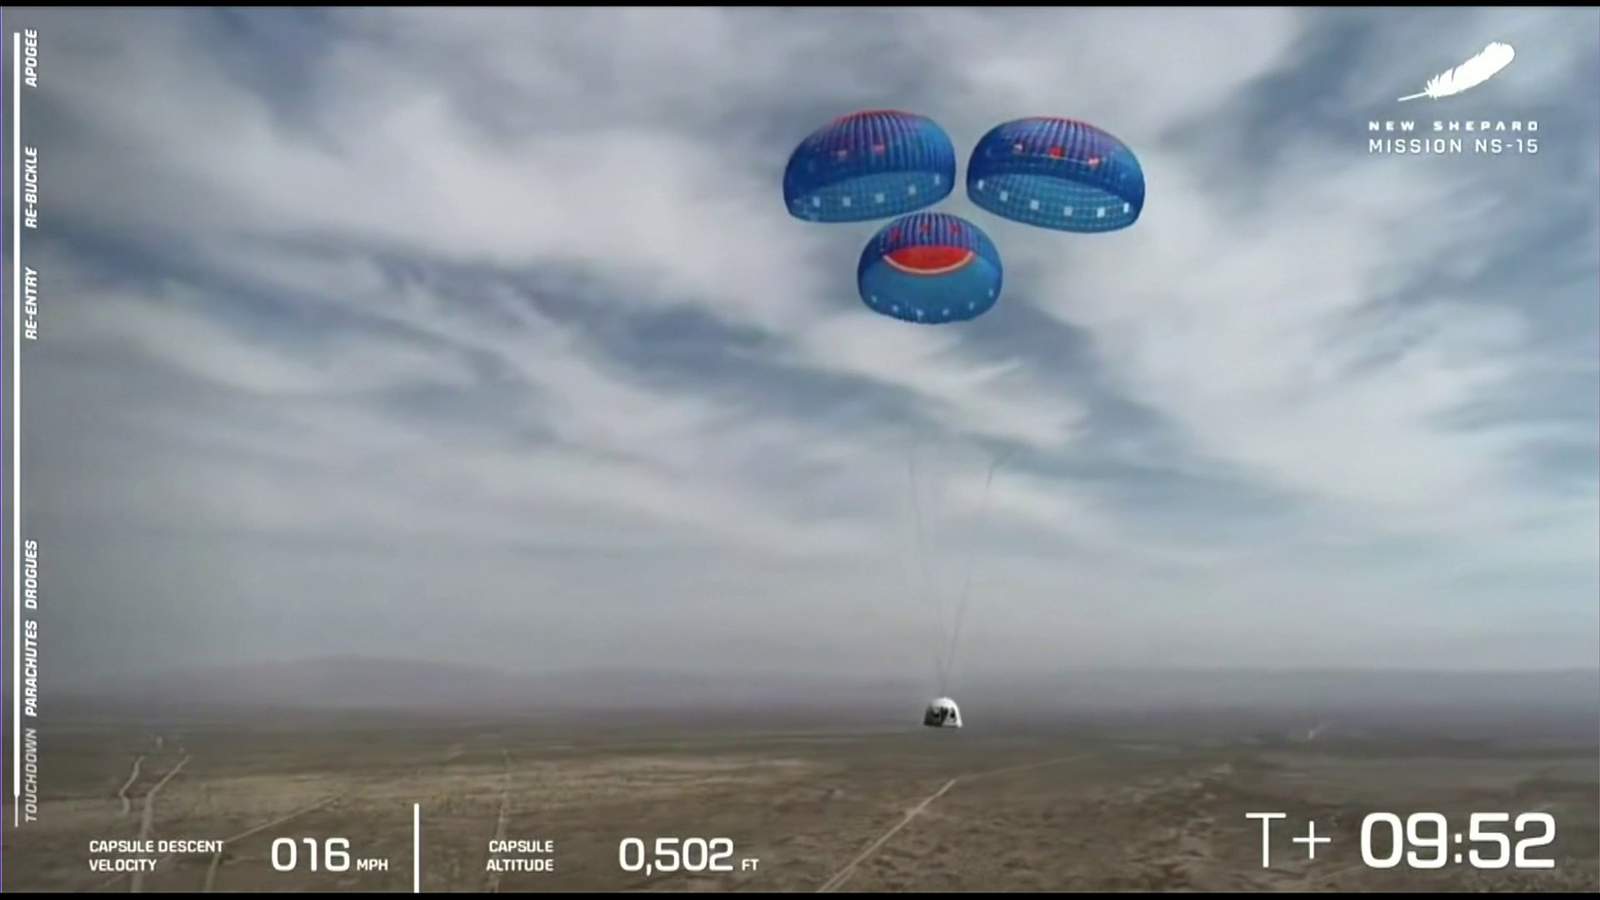 Blue Origin’s rocket takes another flight from Texas with astronaut dress rehearsal